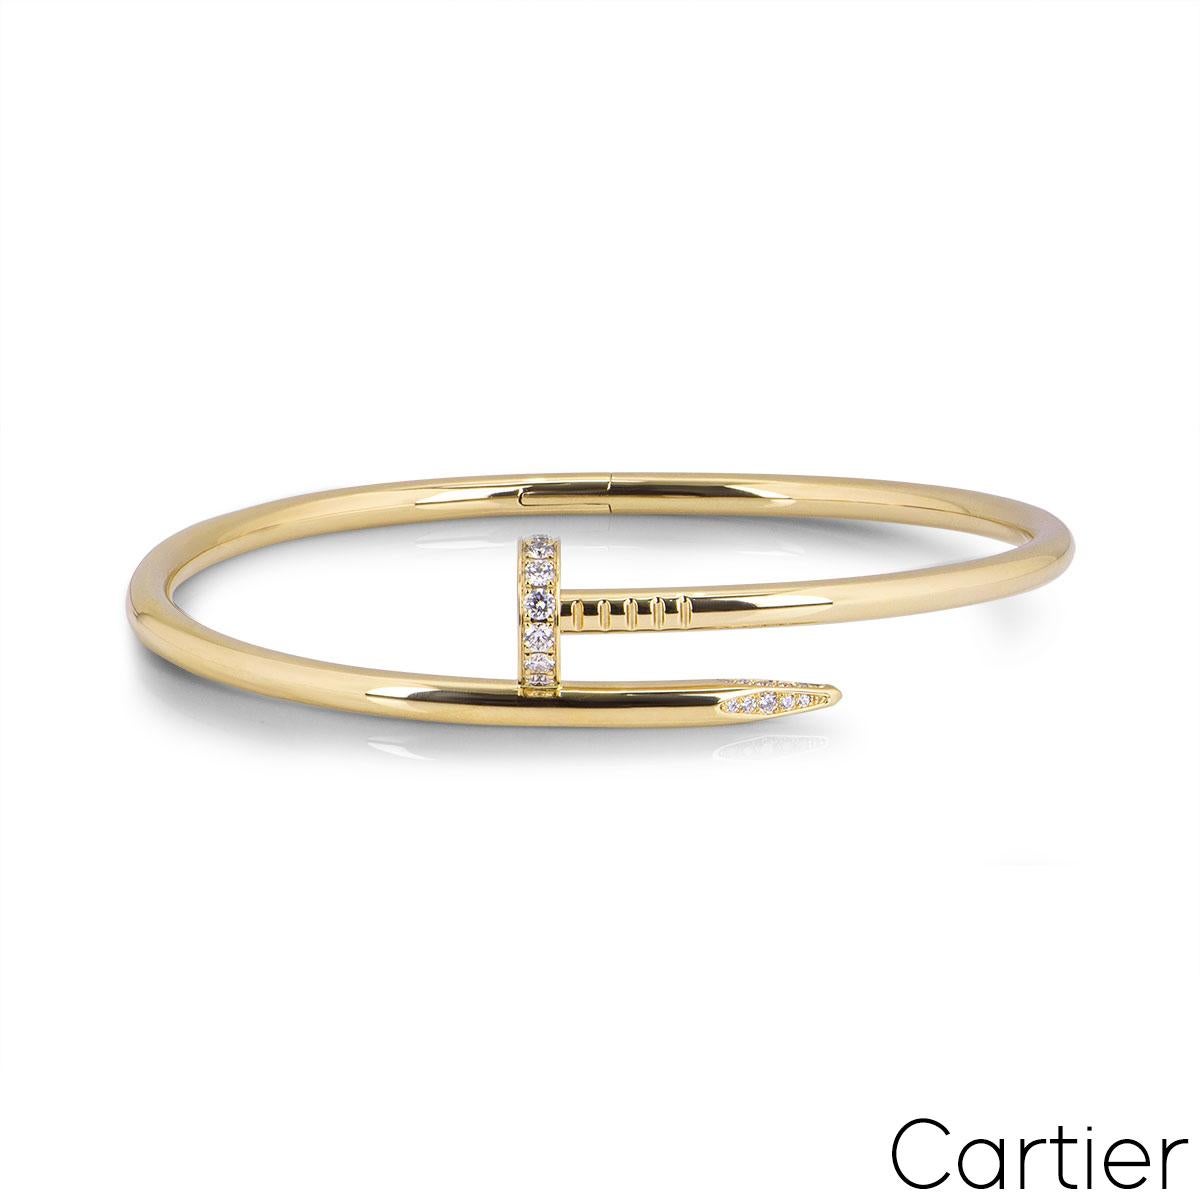 A stunning 18k yellow gold Cartier diamond bracelet from the Juste Un Clou collection. The bracelet is in the style of a nail and has 32 round brilliant cut diamonds pave set in the head and tip, totalling 0.58ct. The diamonds are predominantly F